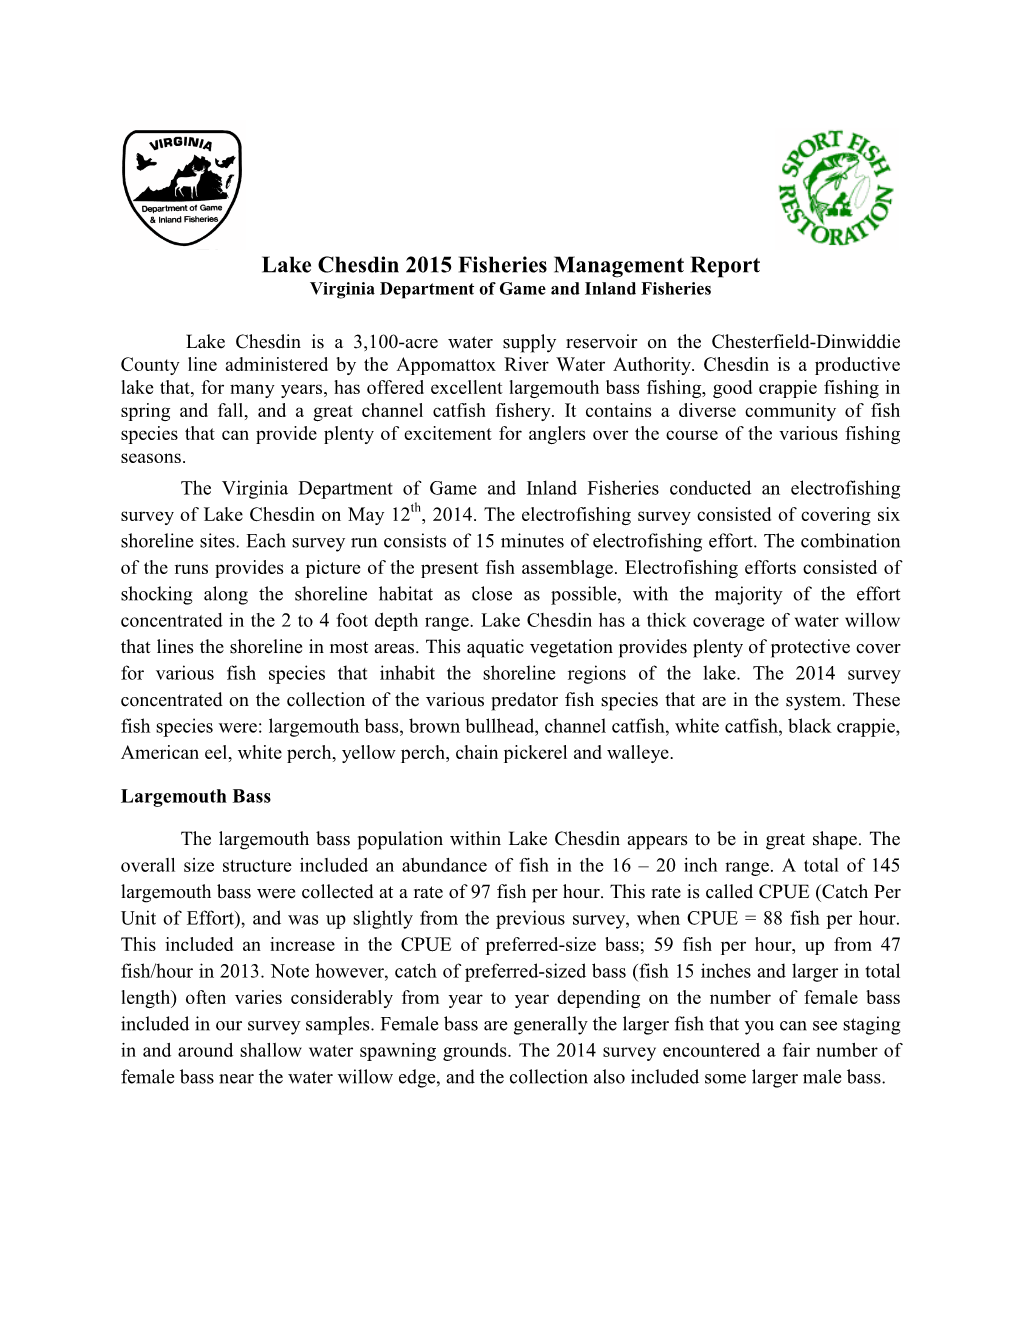 Lake Chesdin 2015 Fisheries Management Report Virginia Department of Game and Inland Fisheries